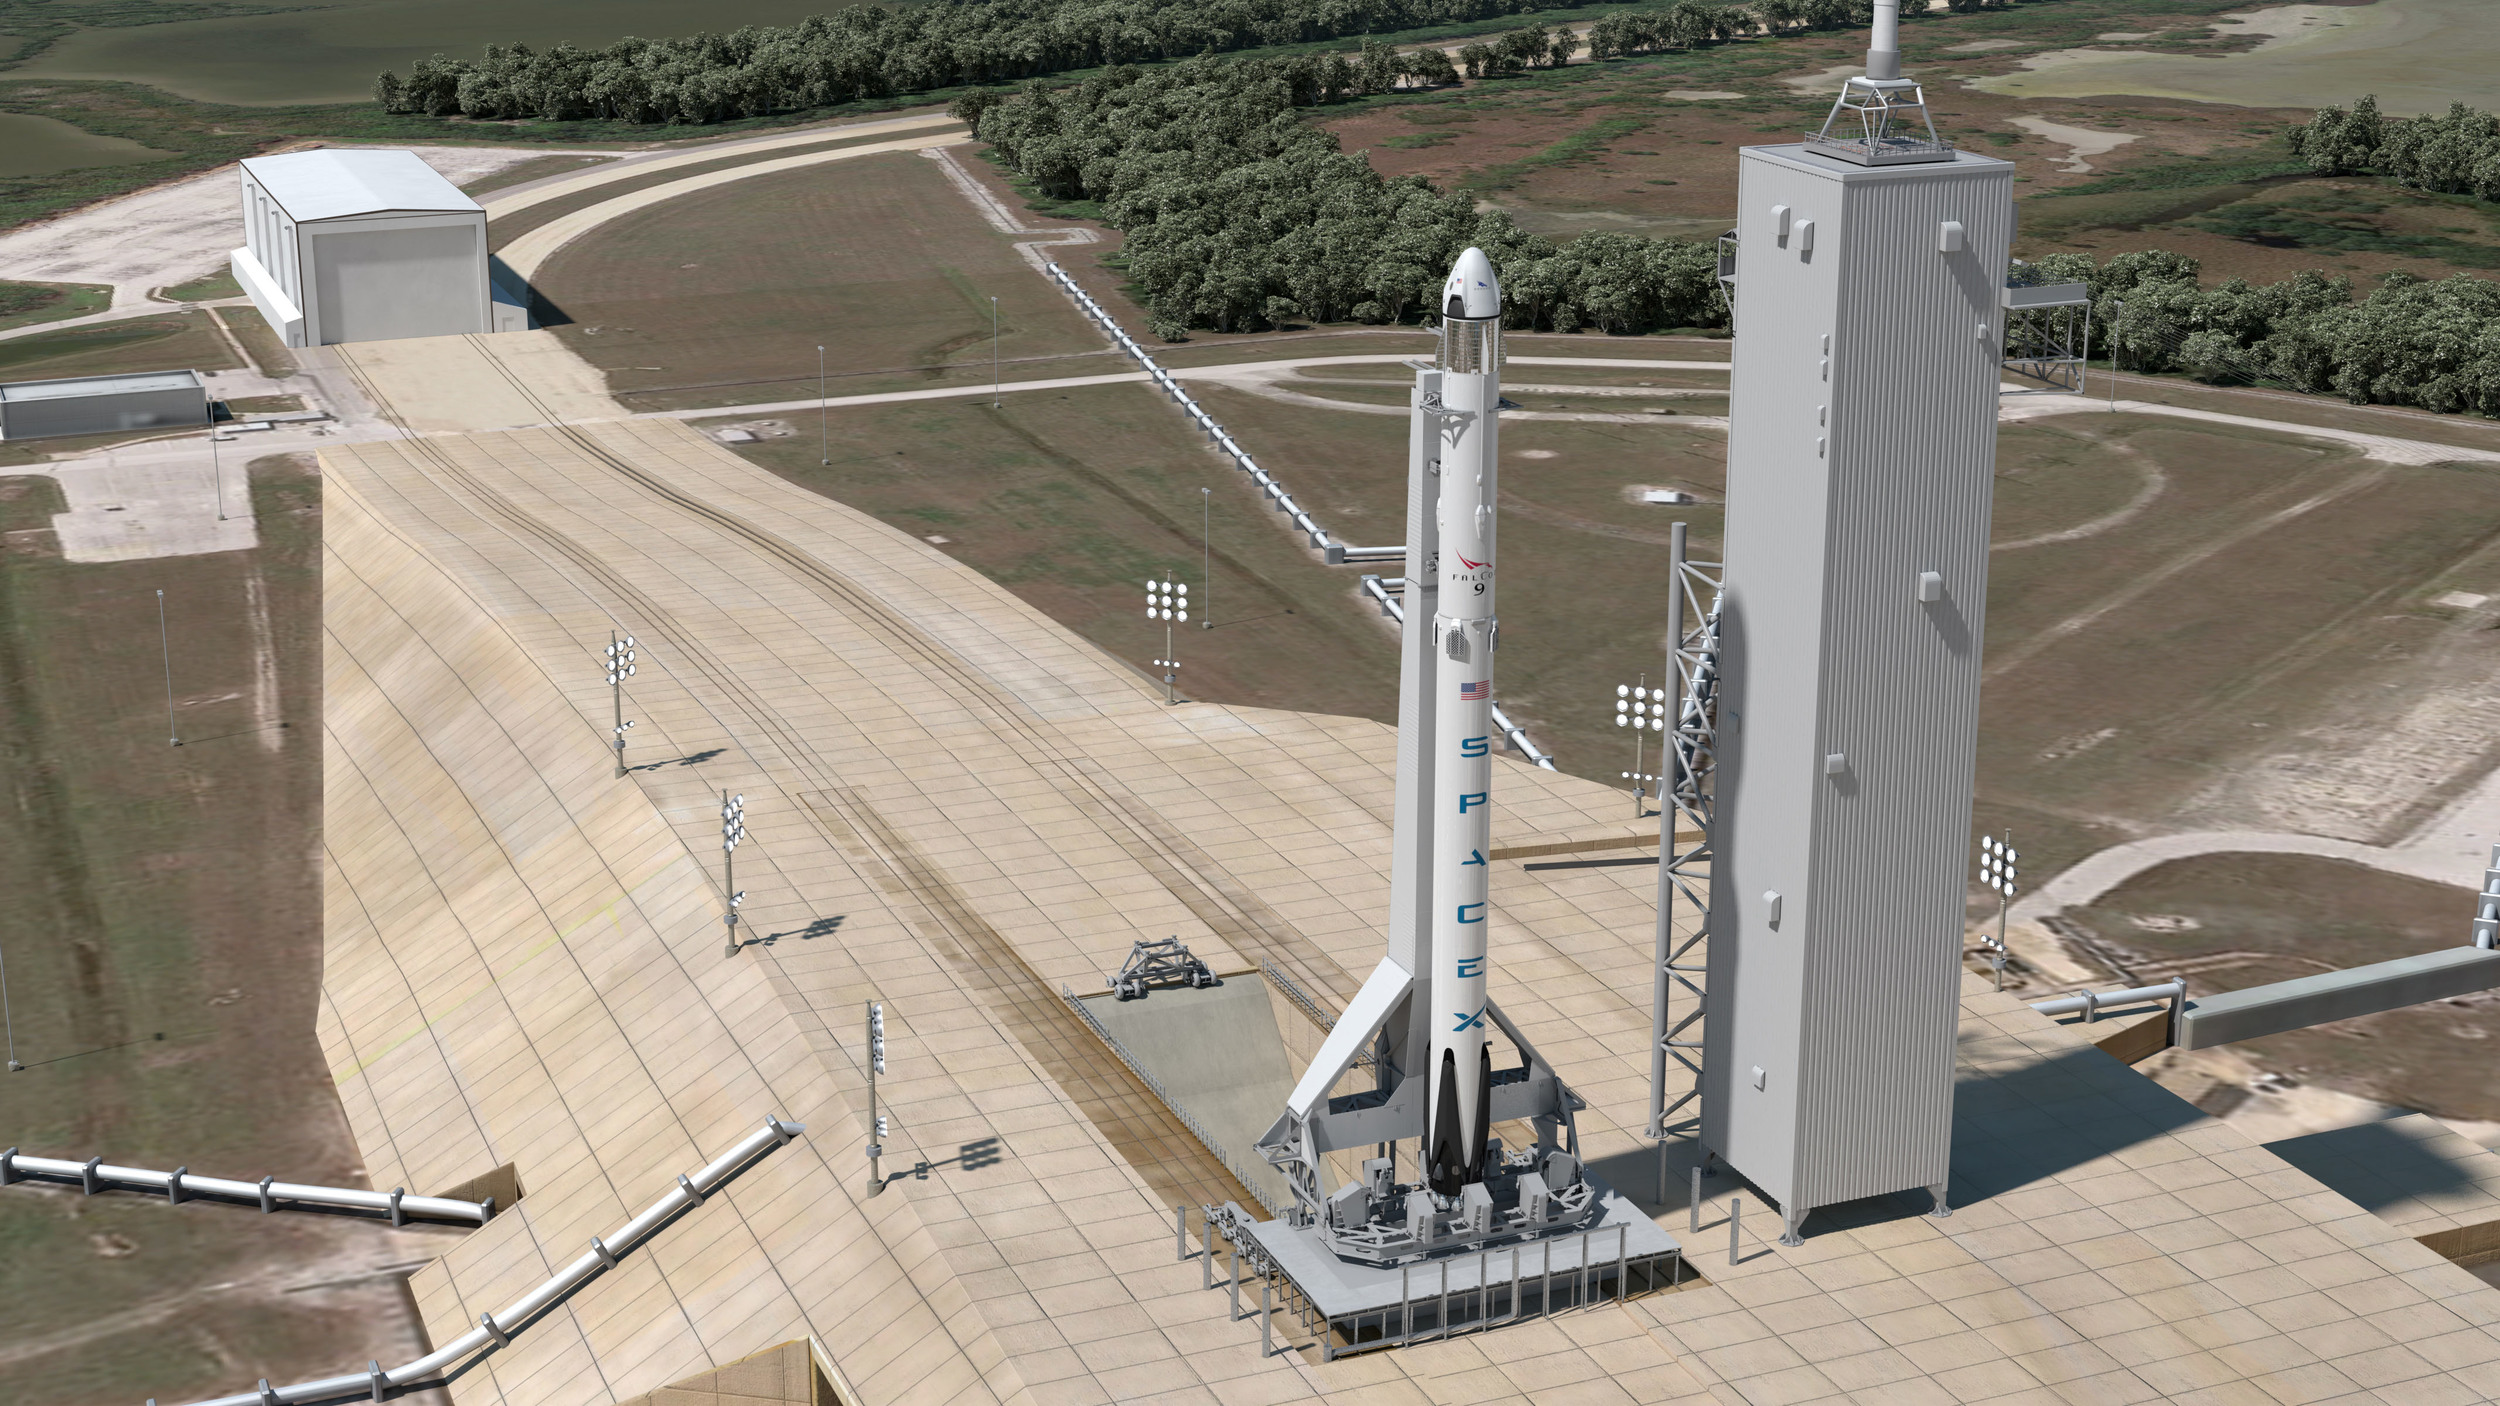  An artist's rendering of Crew Dragon atop a Falcon 9 at Launch Complex 39A. Image Credit: SpaceX 